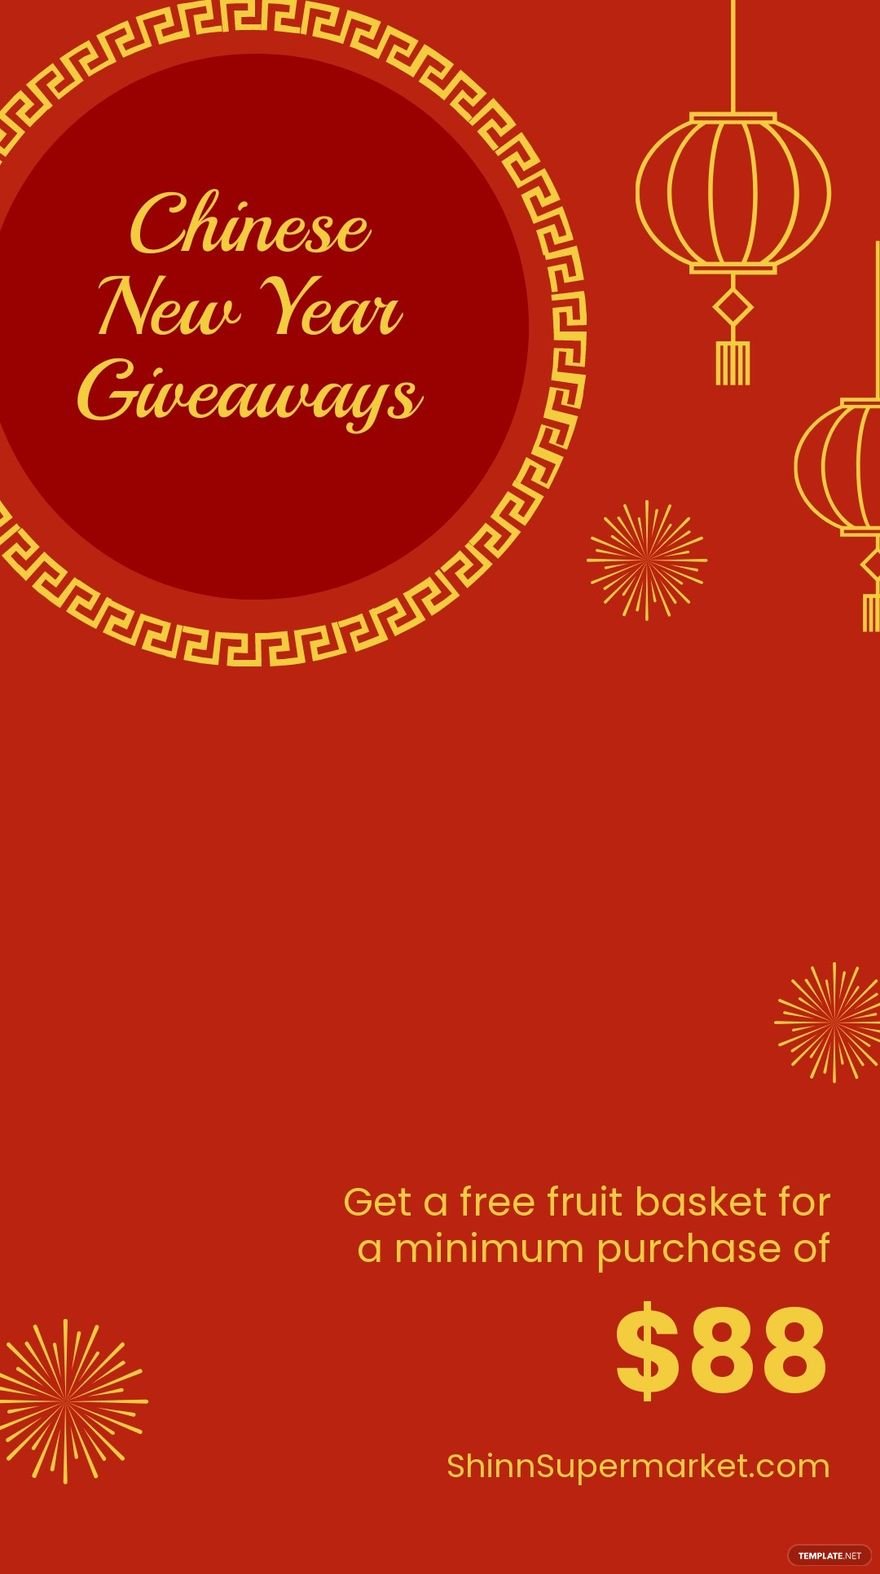 Chinese New Year Giveaway Snapchat Geofilter Template